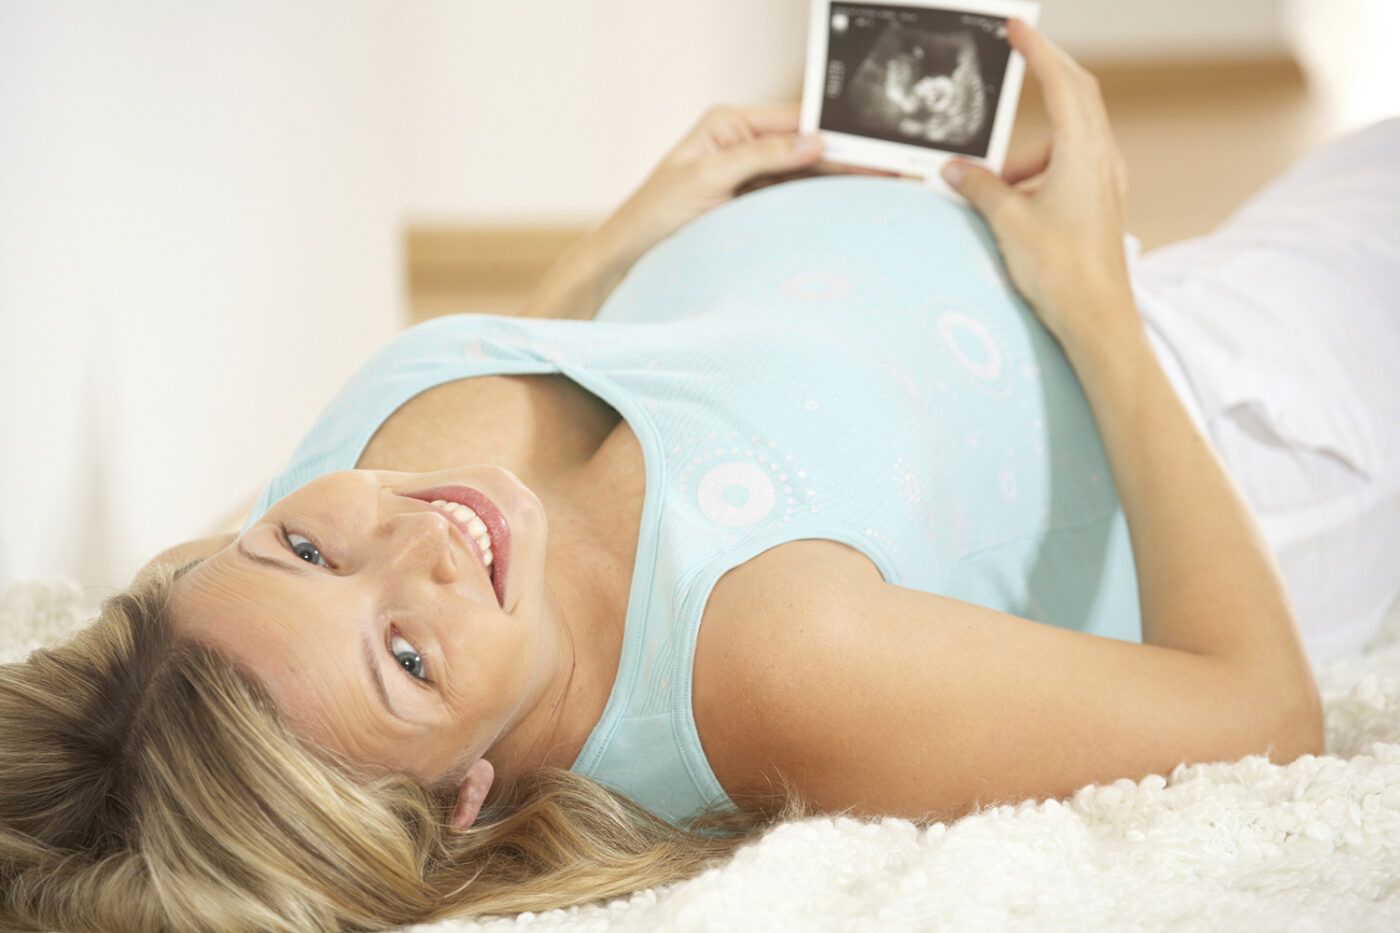 PREGNANCY CARE – Care for women during pregnancy